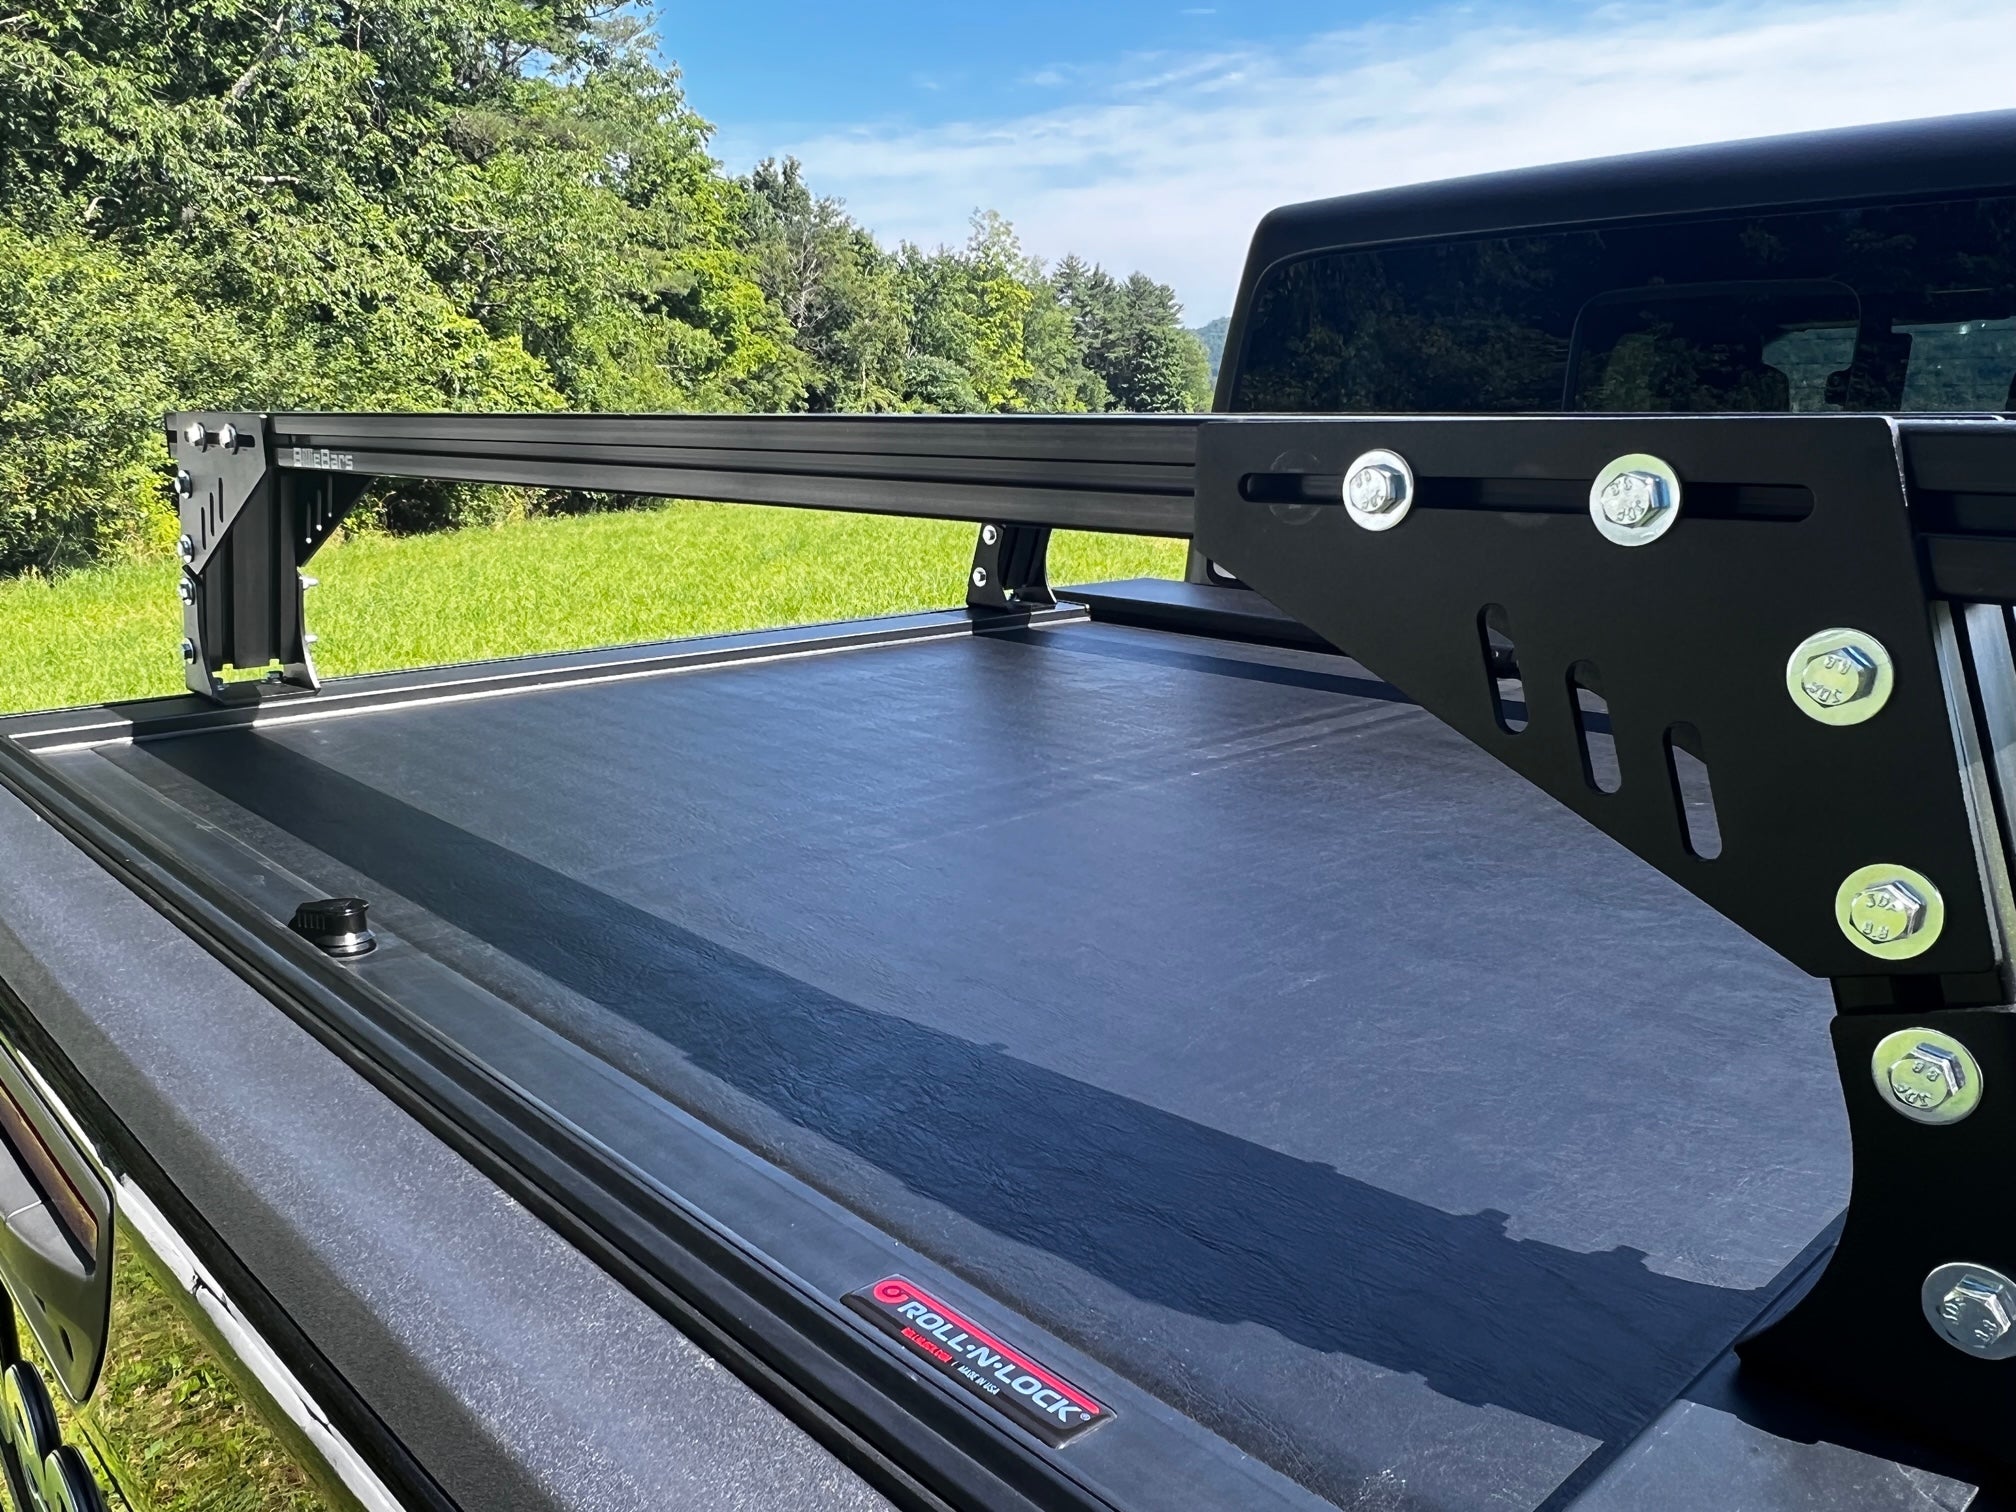 Gladiator - Bed Rack For Retractable Covers with T-slots